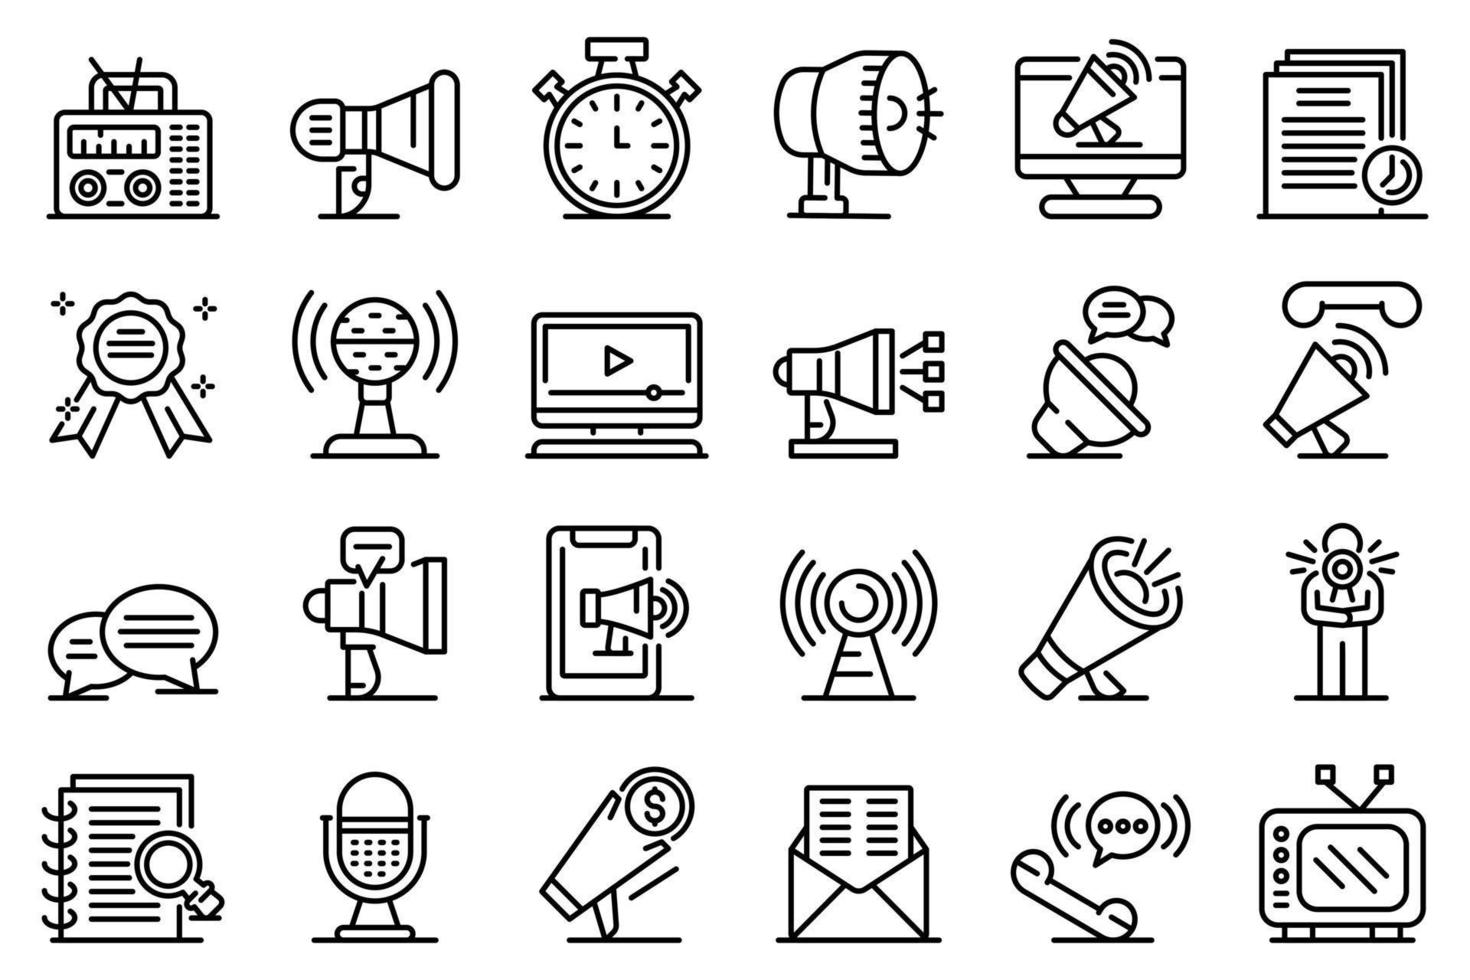 Announcer icons set, outline style vector